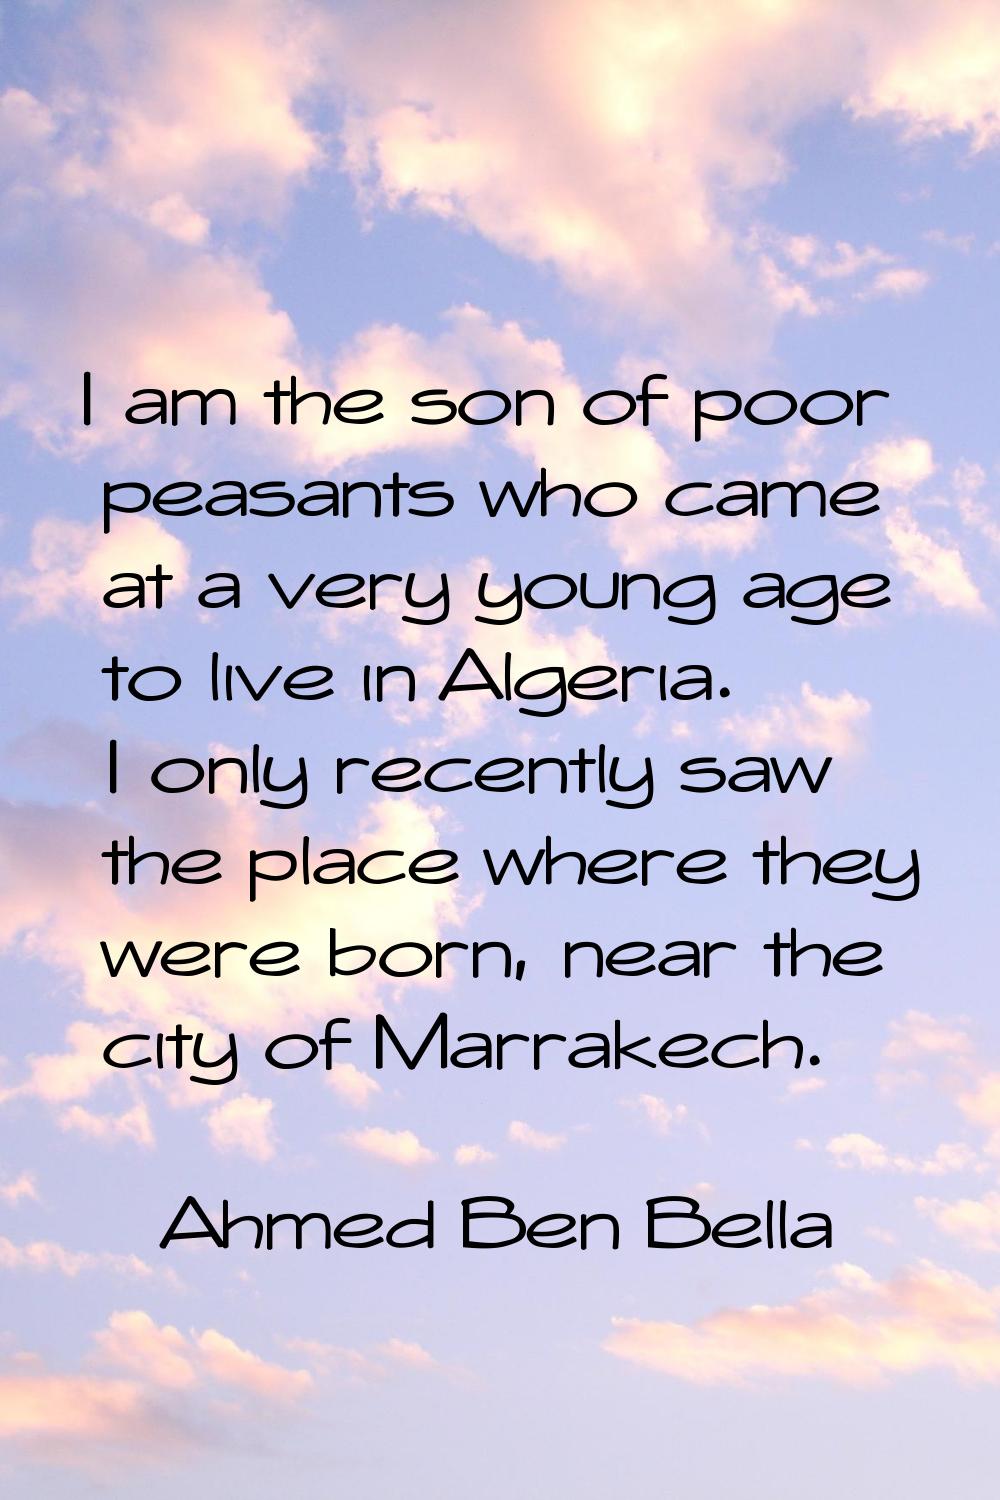 I am the son of poor peasants who came at a very young age to live in Algeria. I only recently saw 